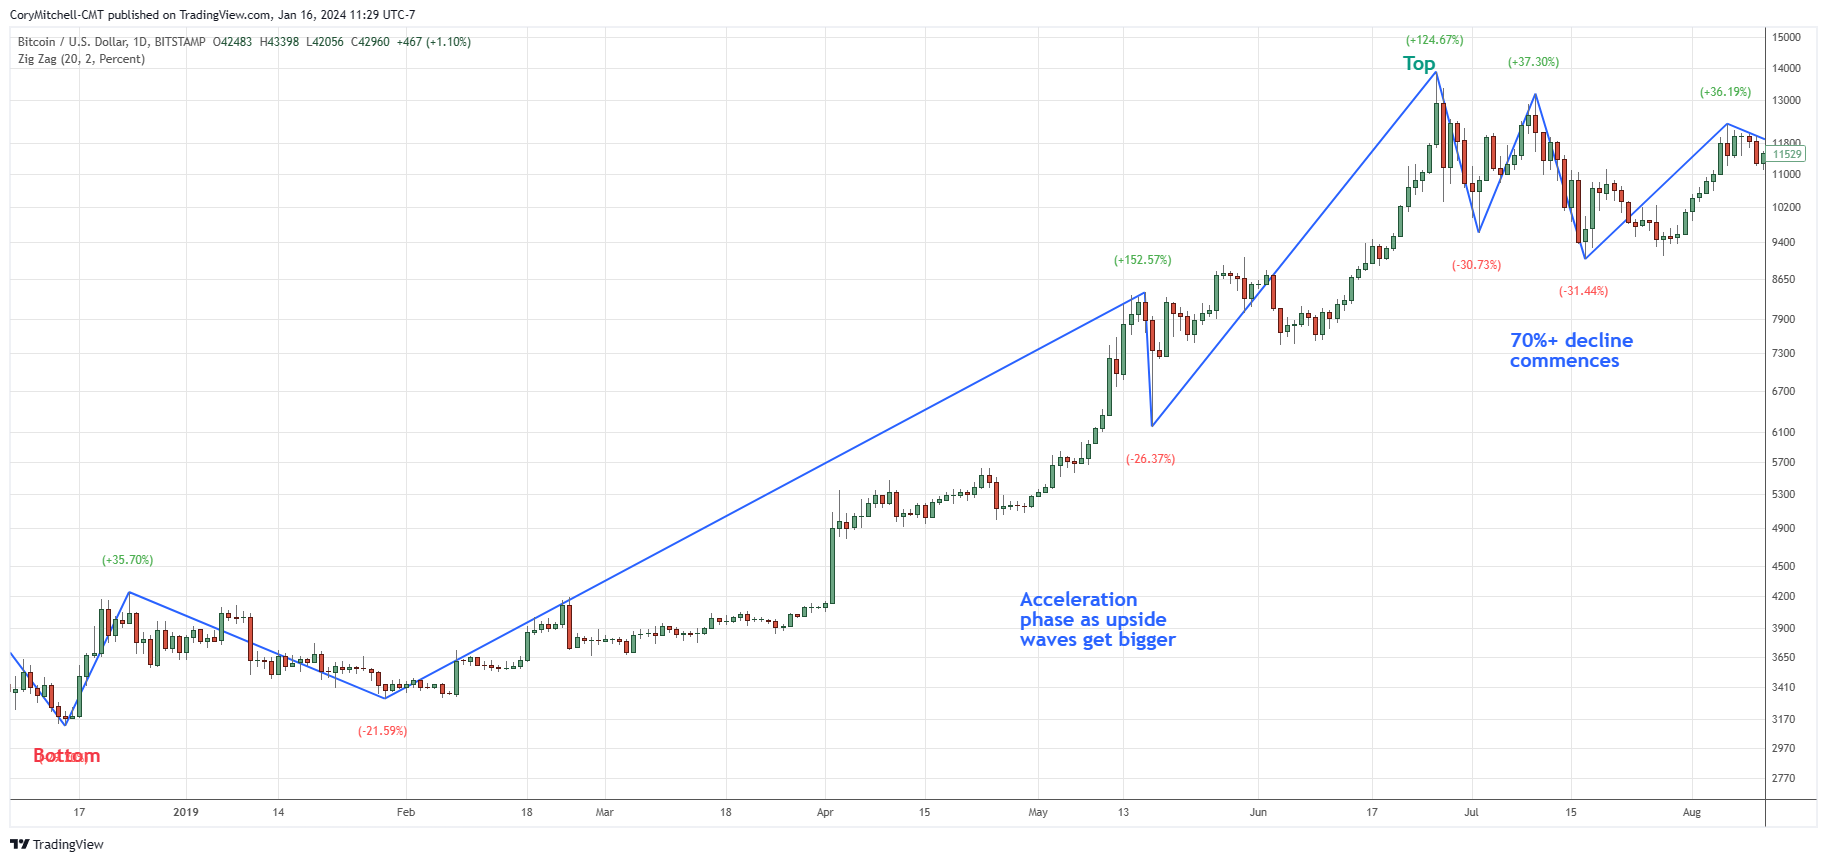 bitcoin 2019 bull market with all rally and decline percentages